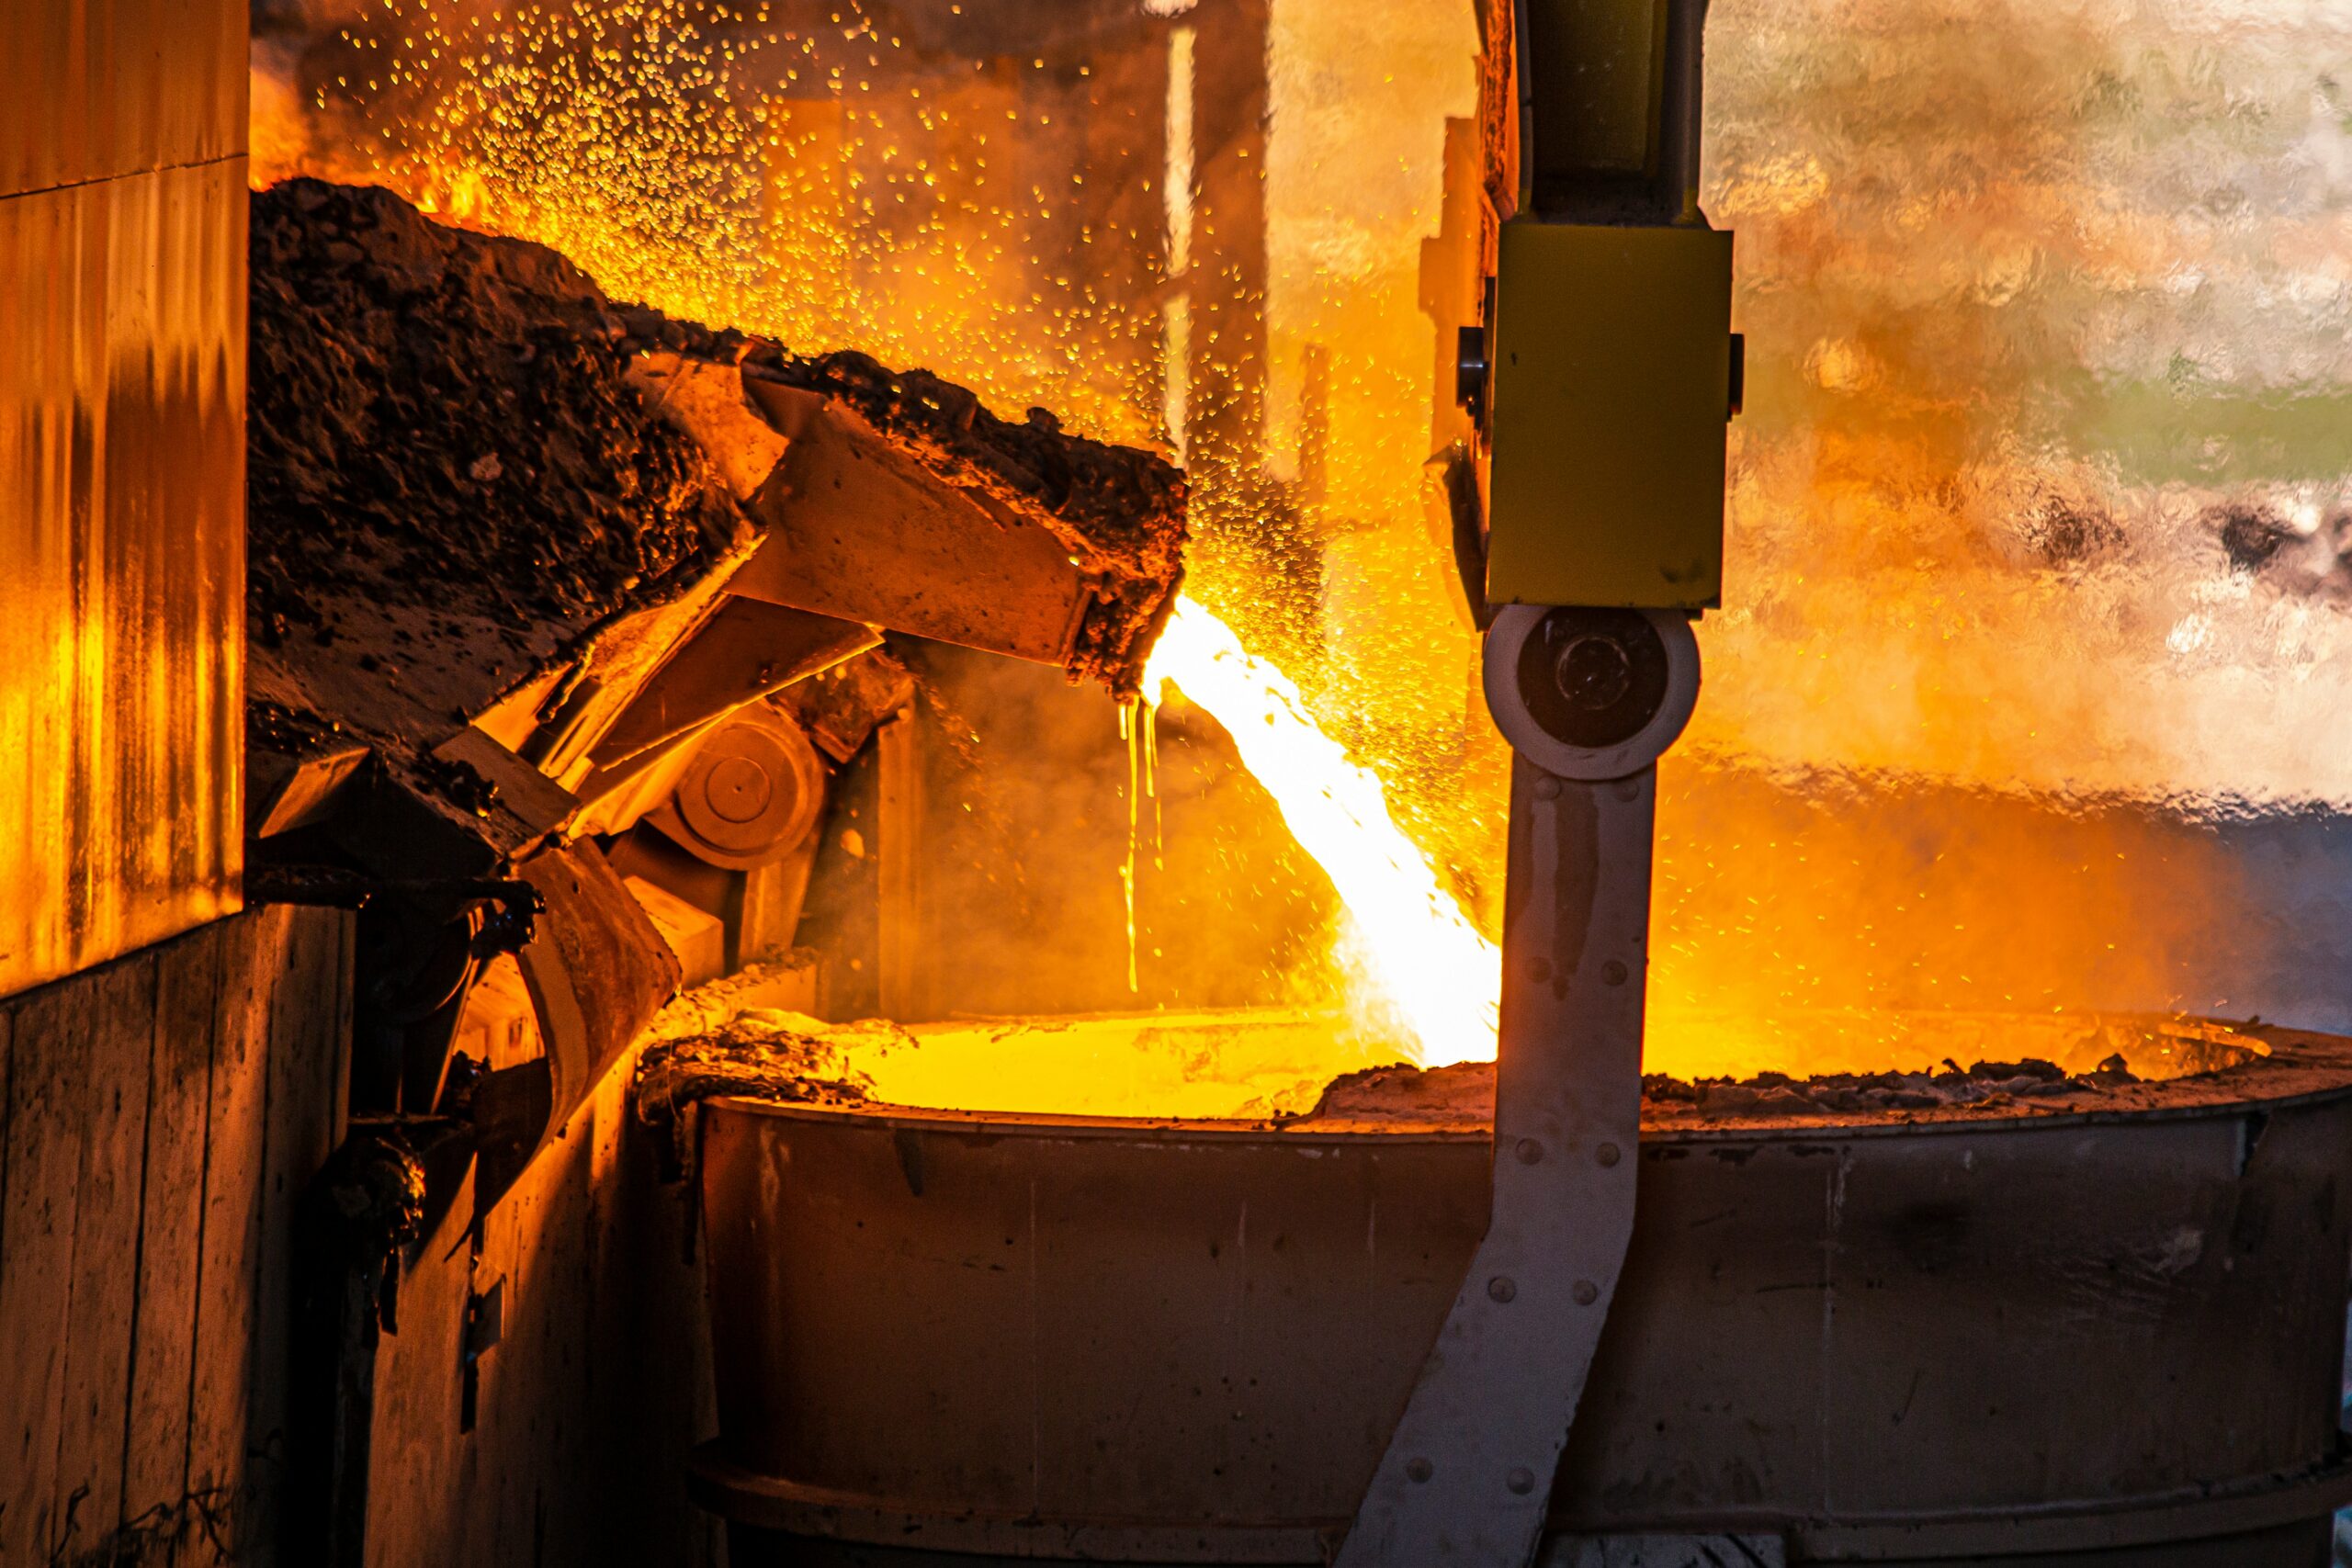 H2 Green Steel Secures Financing of SEK 48 Billion for World's First Large-Scale Green Steel Plant